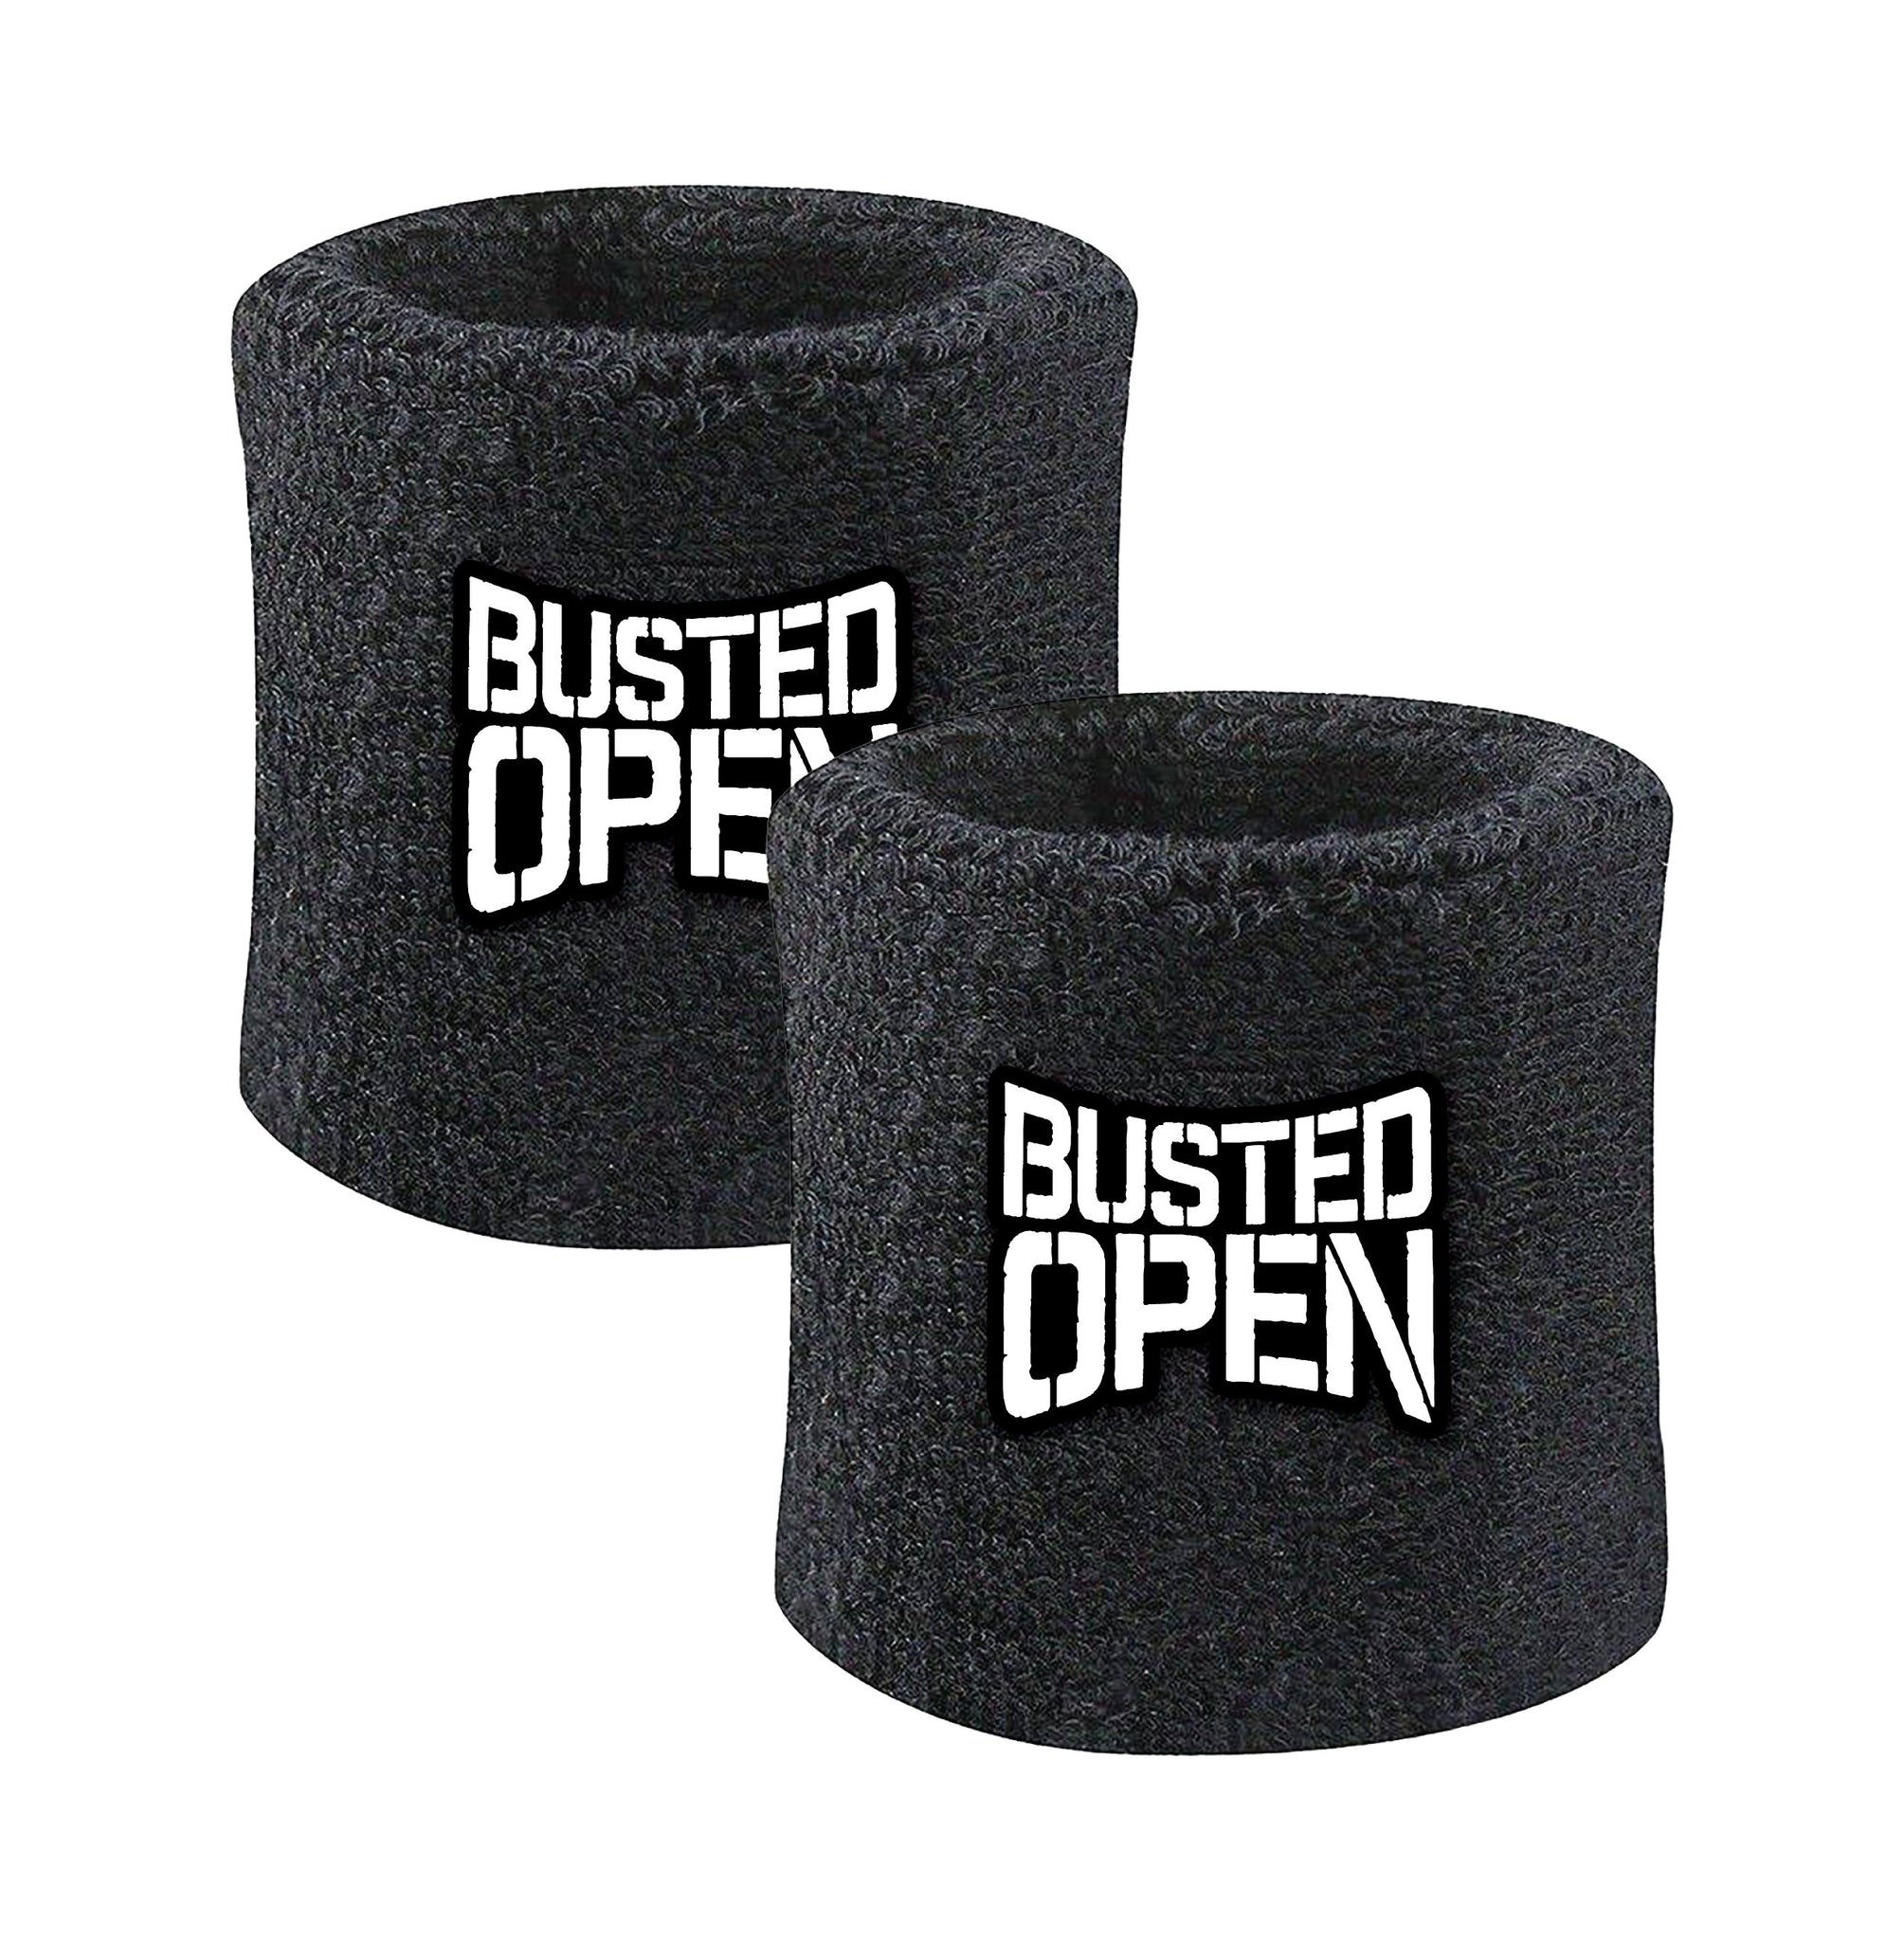 Busted Open: Wristband Set (Set of 2)